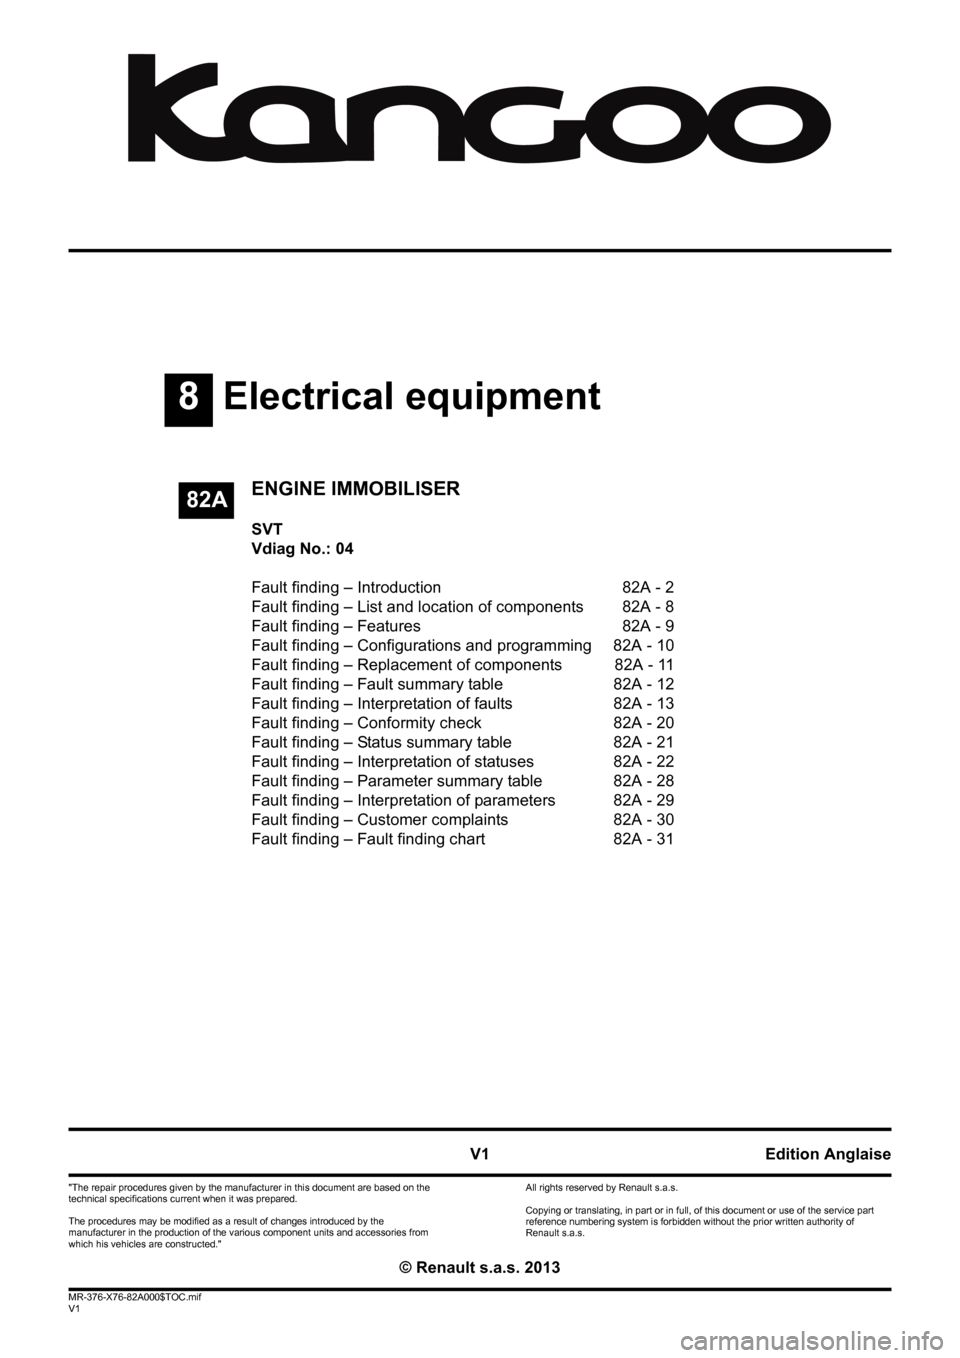 RENAULT KANGOO 2013 X61 / 2.G Engine Immobiliser Workshop Manual 8Electrical equipment
V1 MR-376-X76-82A000$TOC.mif
V1
82A
"The repair procedures given by the manufacturer in this document are based on the 
technical specifications current when it was prepared.
The